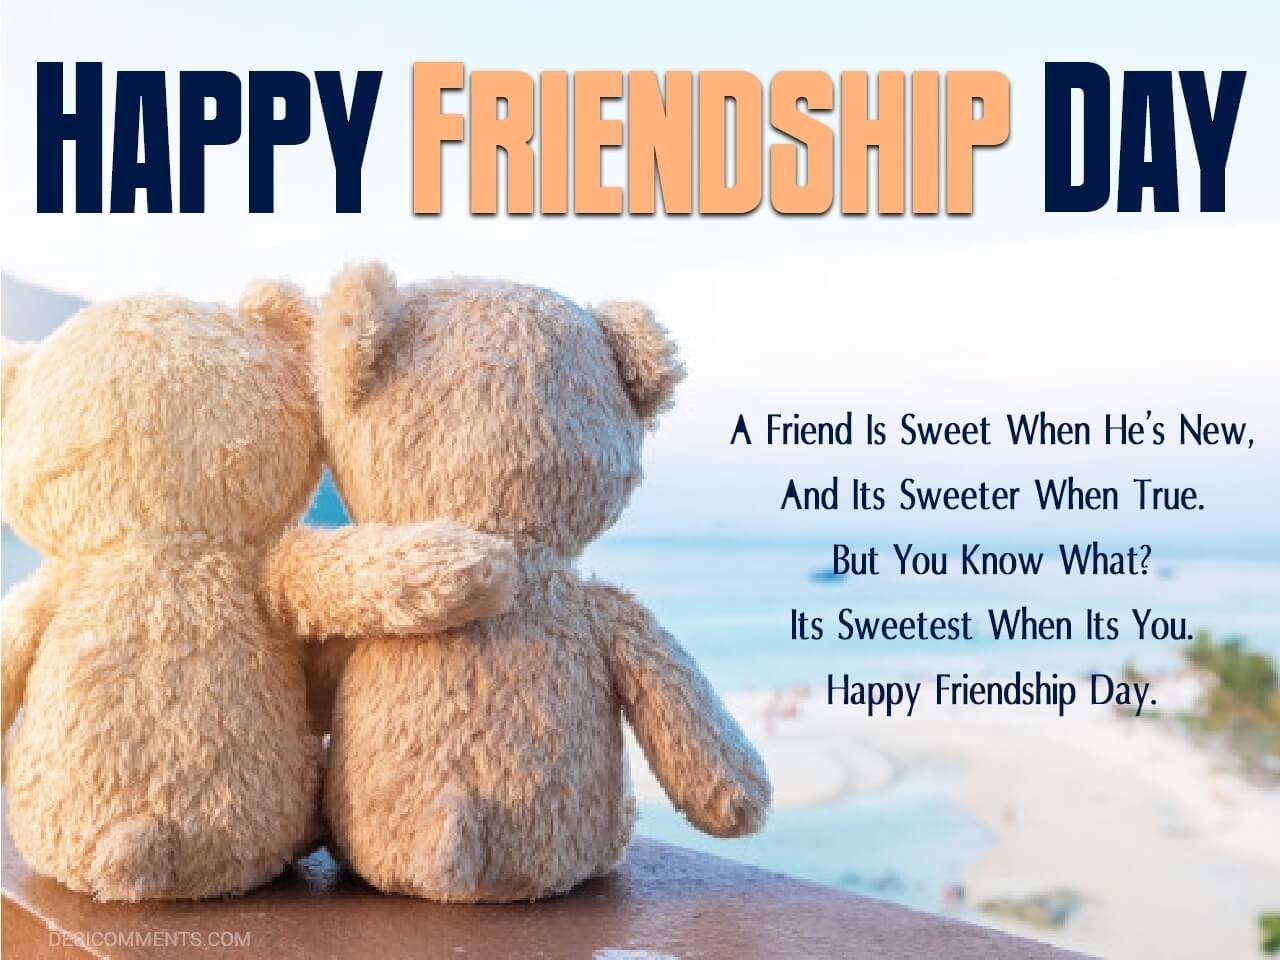 350+ Friendship Day Images, Pictures, Photos - Page 3